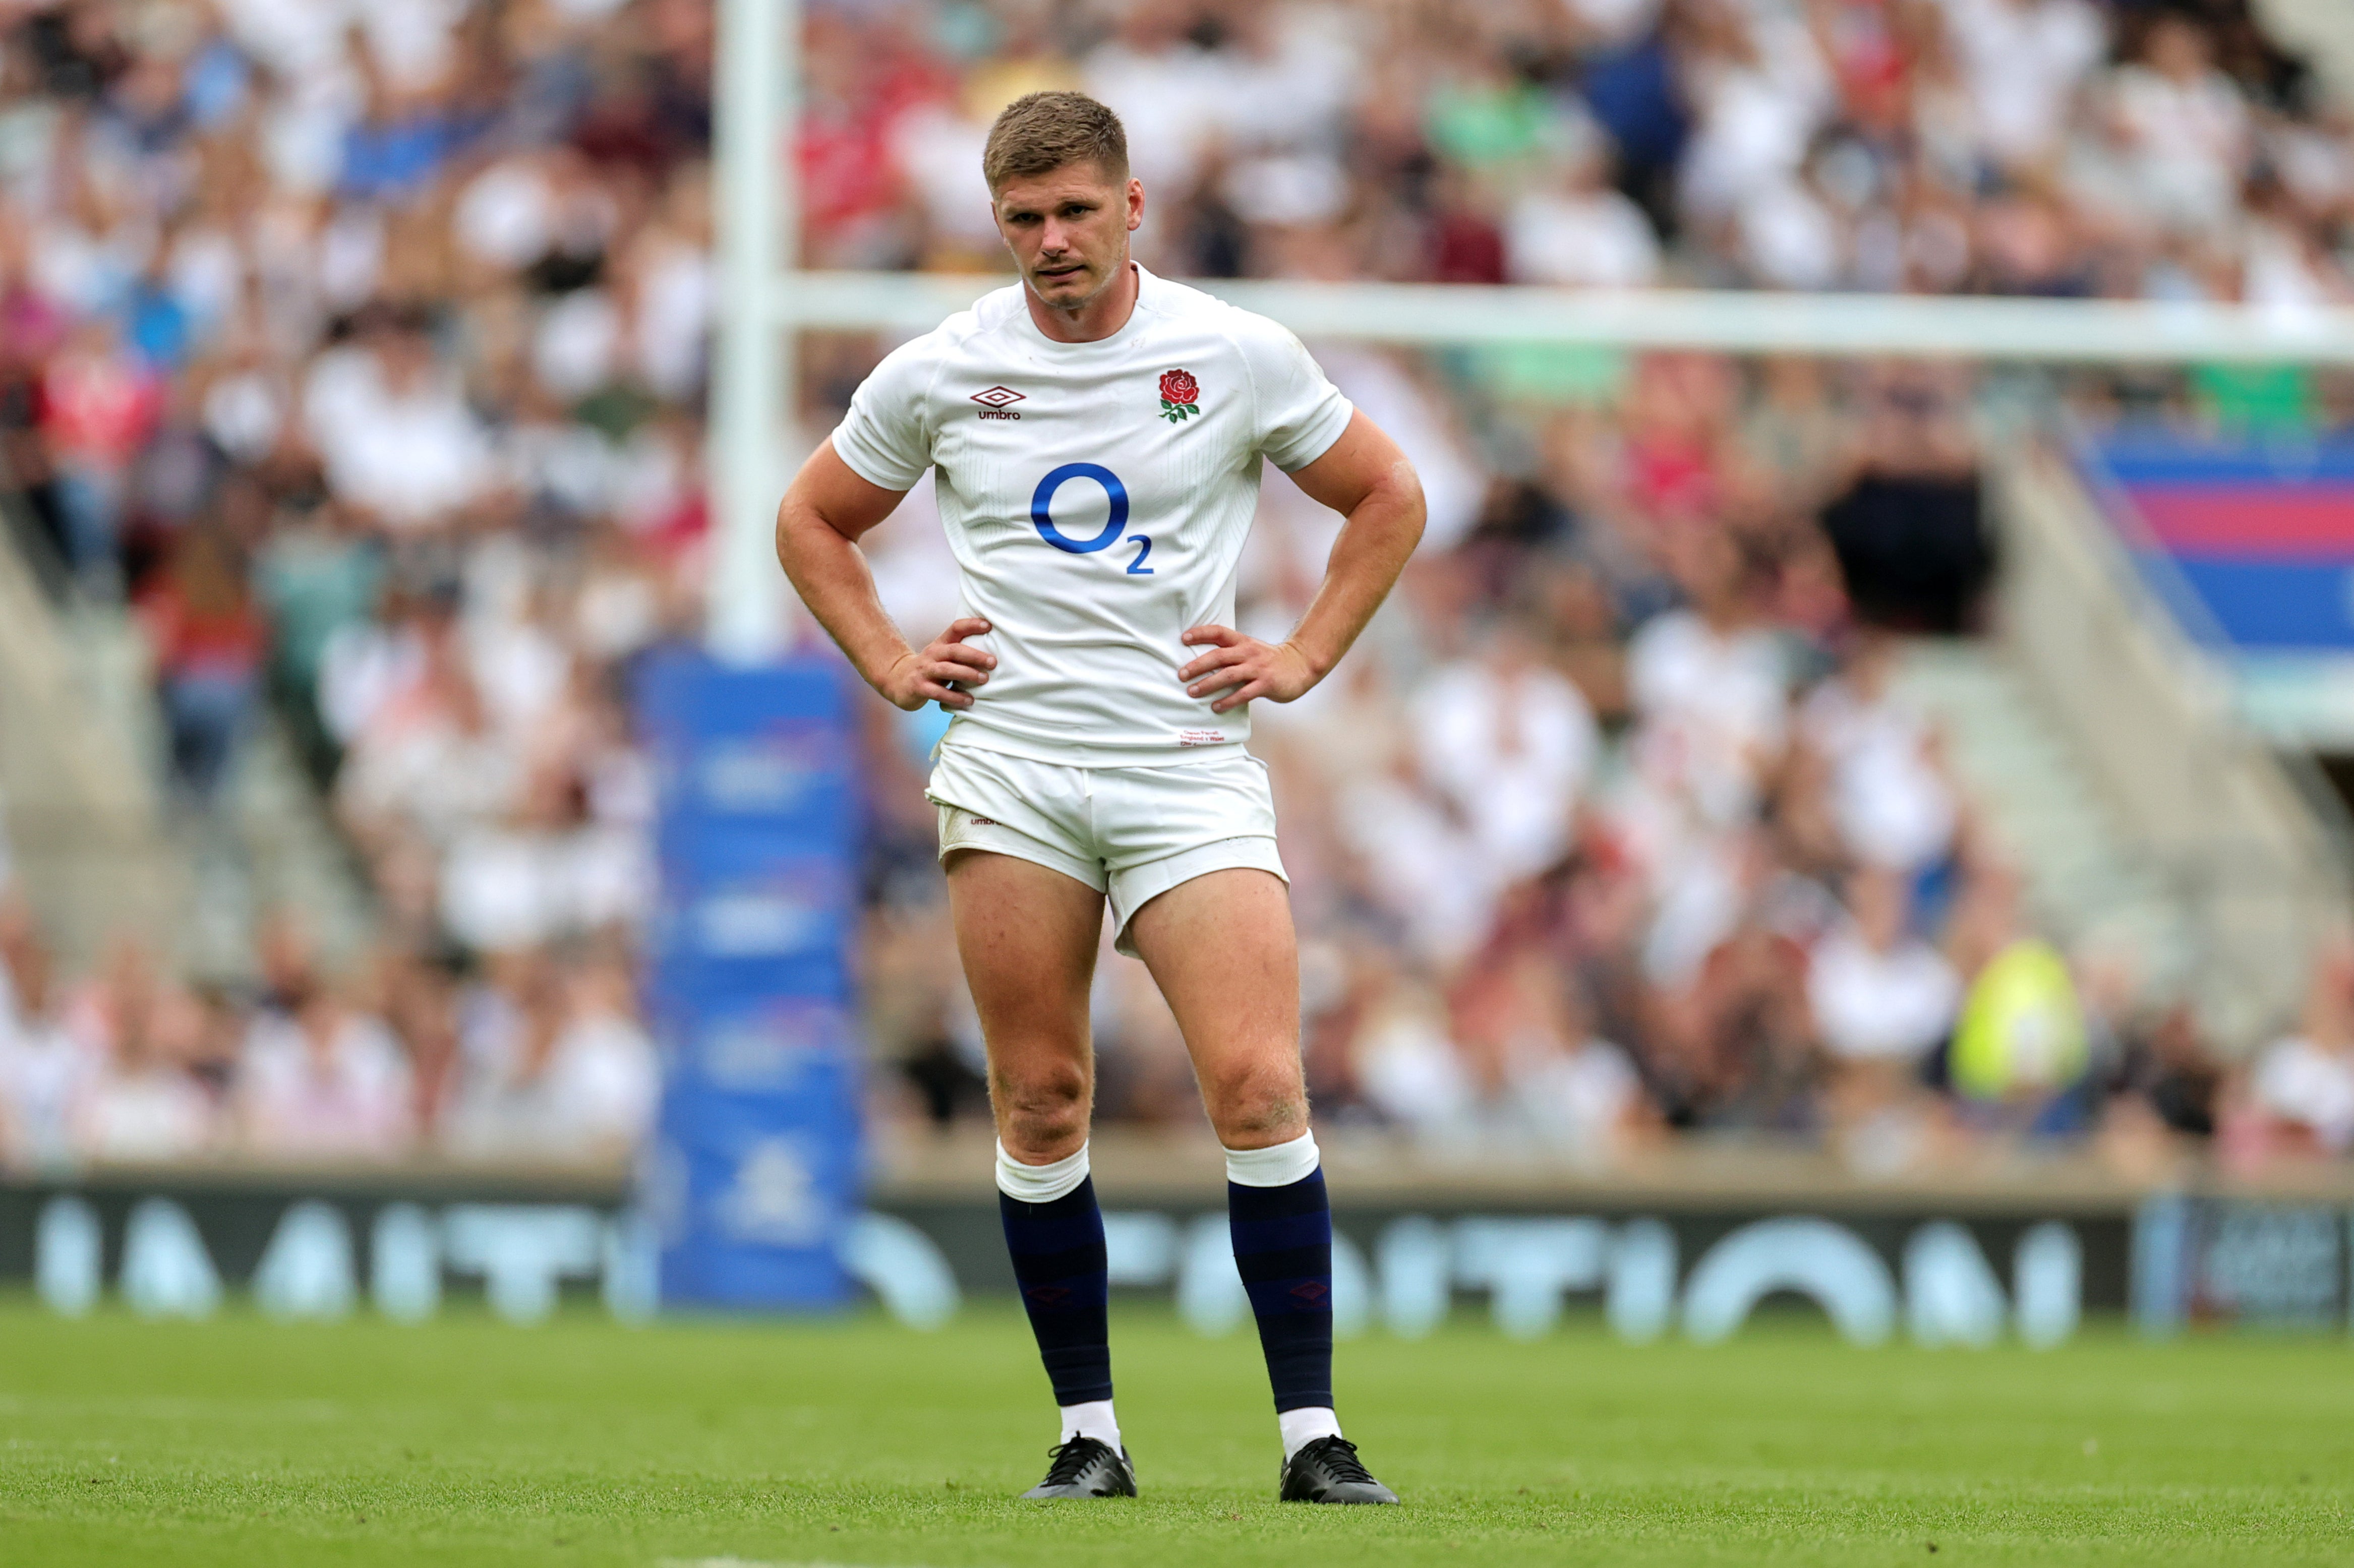 Another head-high tackle, another red card for Owen Farrell, this time for England against Wales on Saturday